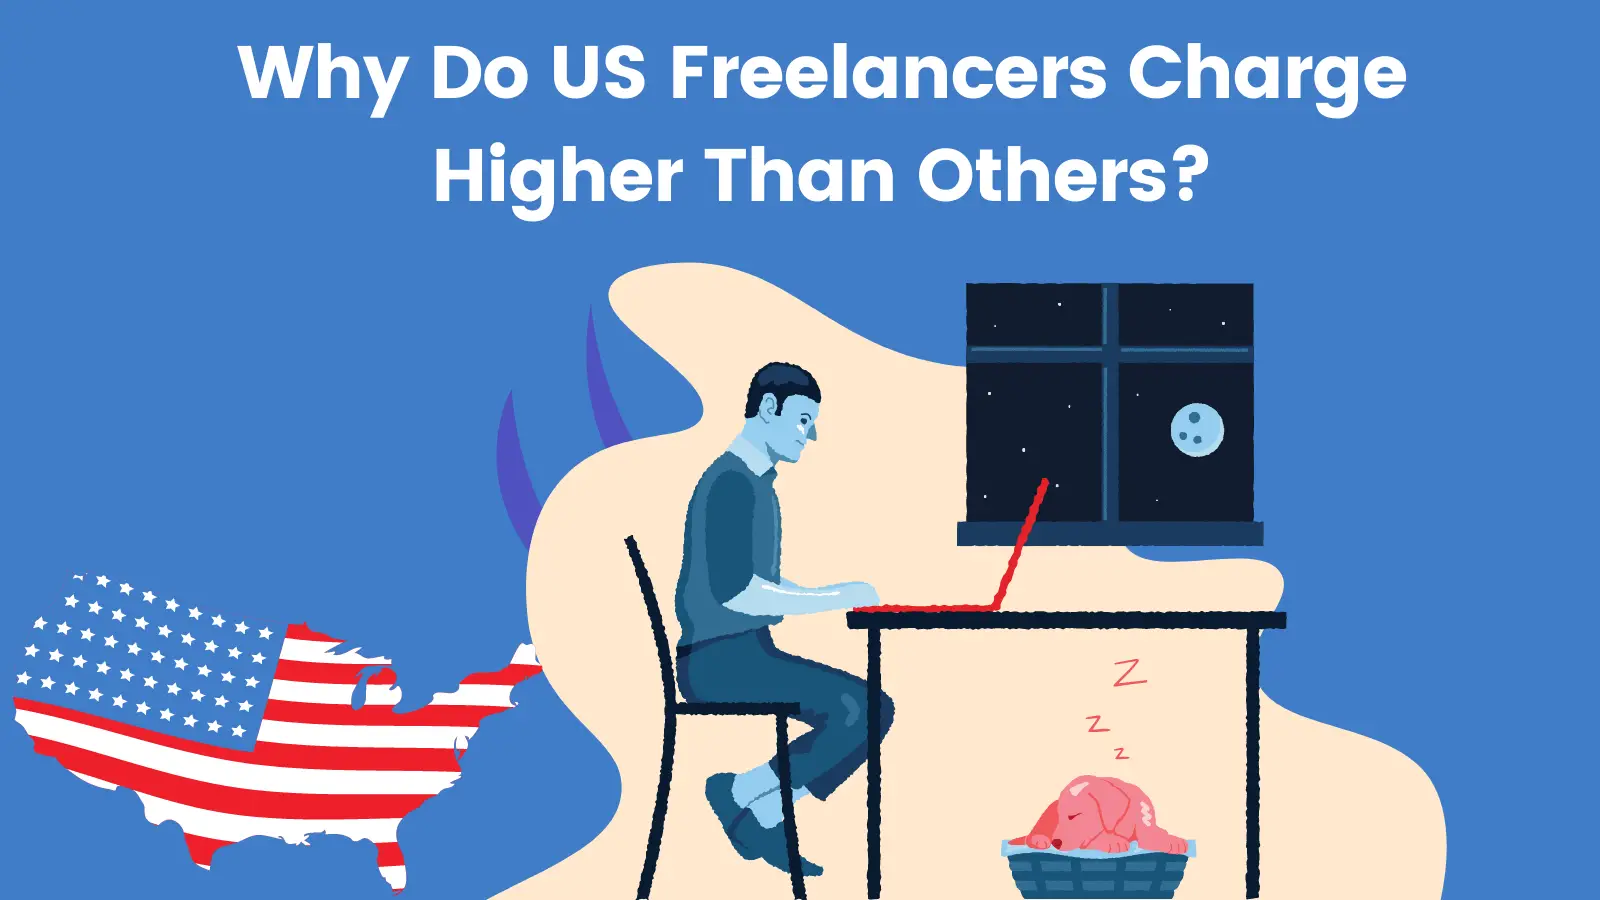 Why Do Us Freelancers Charge Higher Than Others?